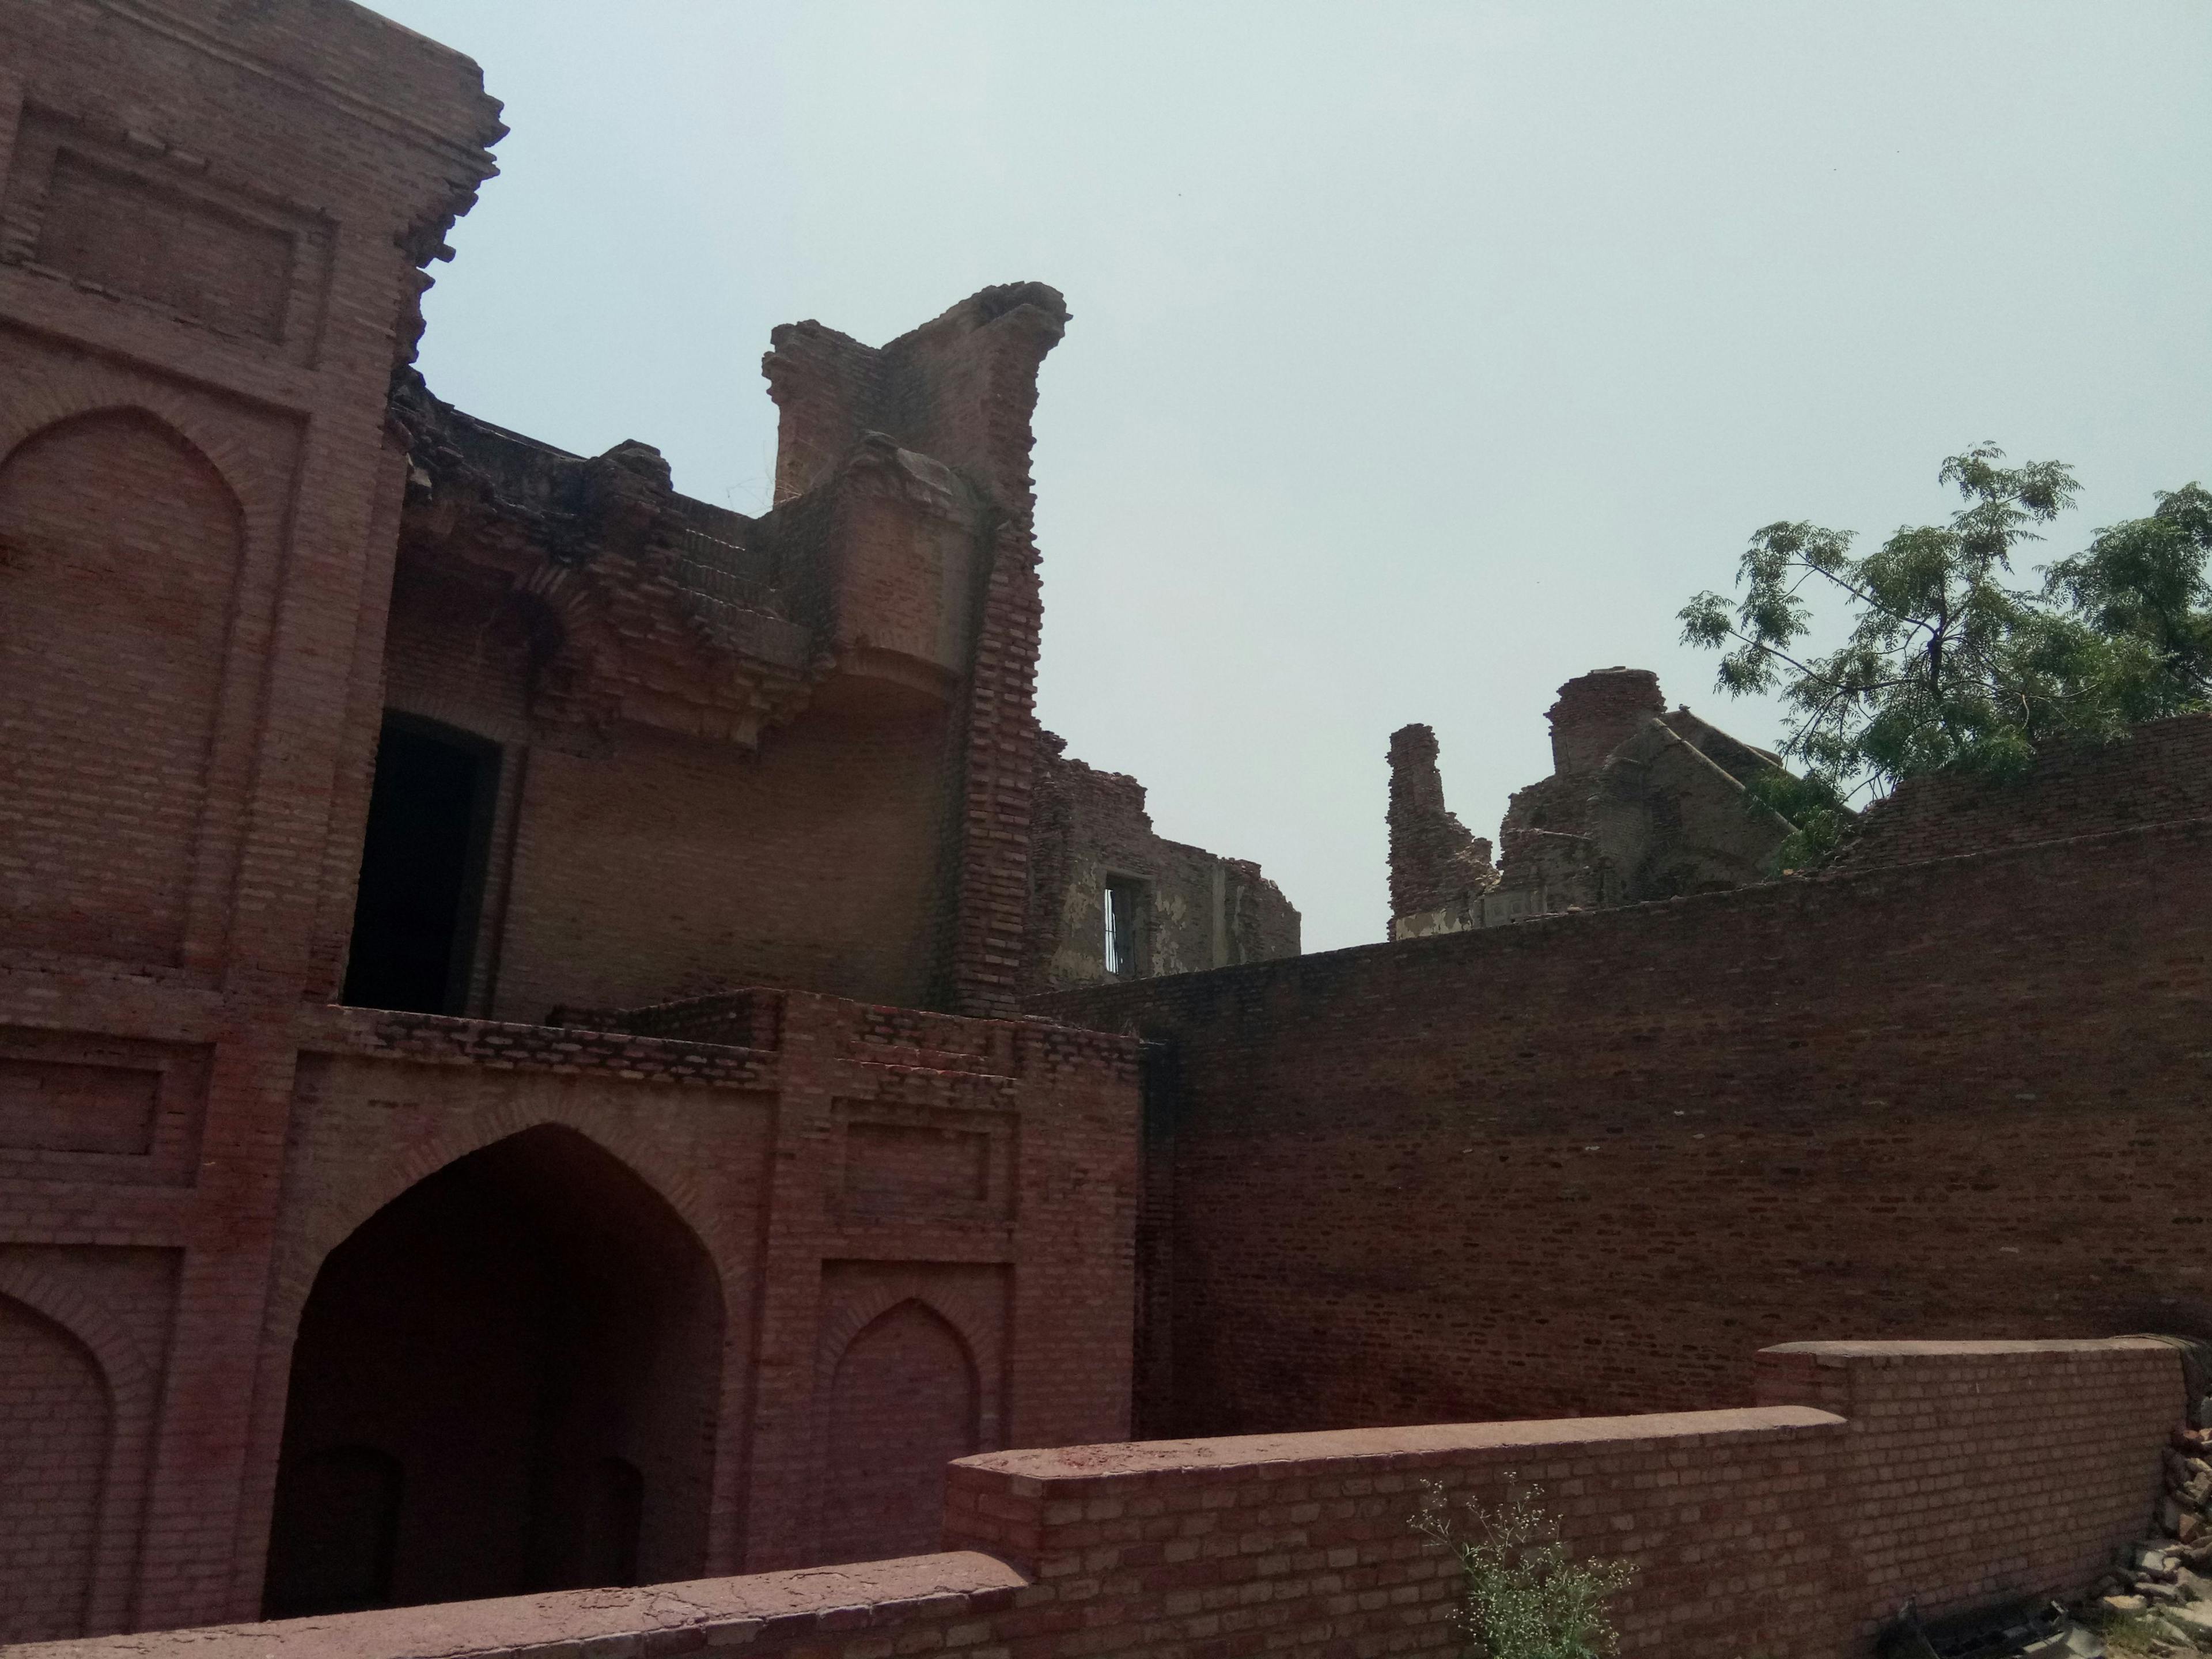 The sarai, today in a dilapidated state